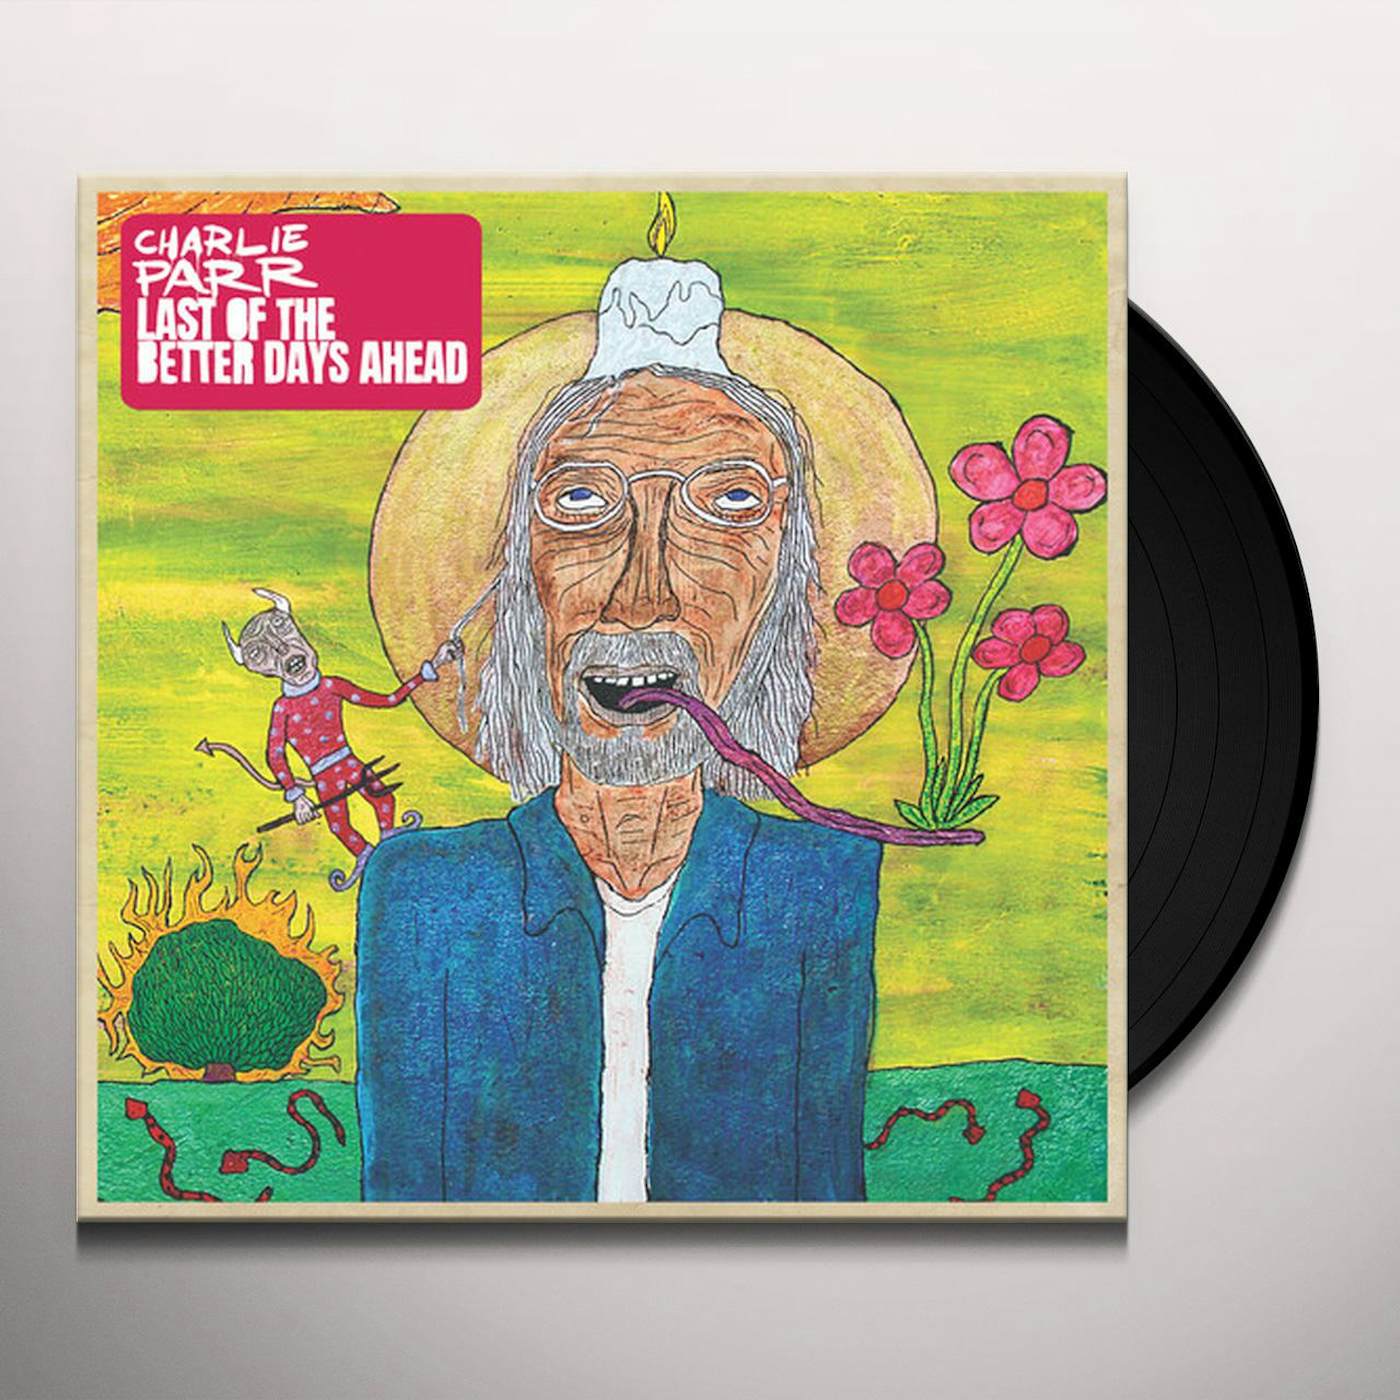 Charlie Parr LAST OF THE BETTER DAYS AHEAD (2LP/YELLOW VINYL/GATEFOLD/LIMITED/IMPORT) Vinyl Record